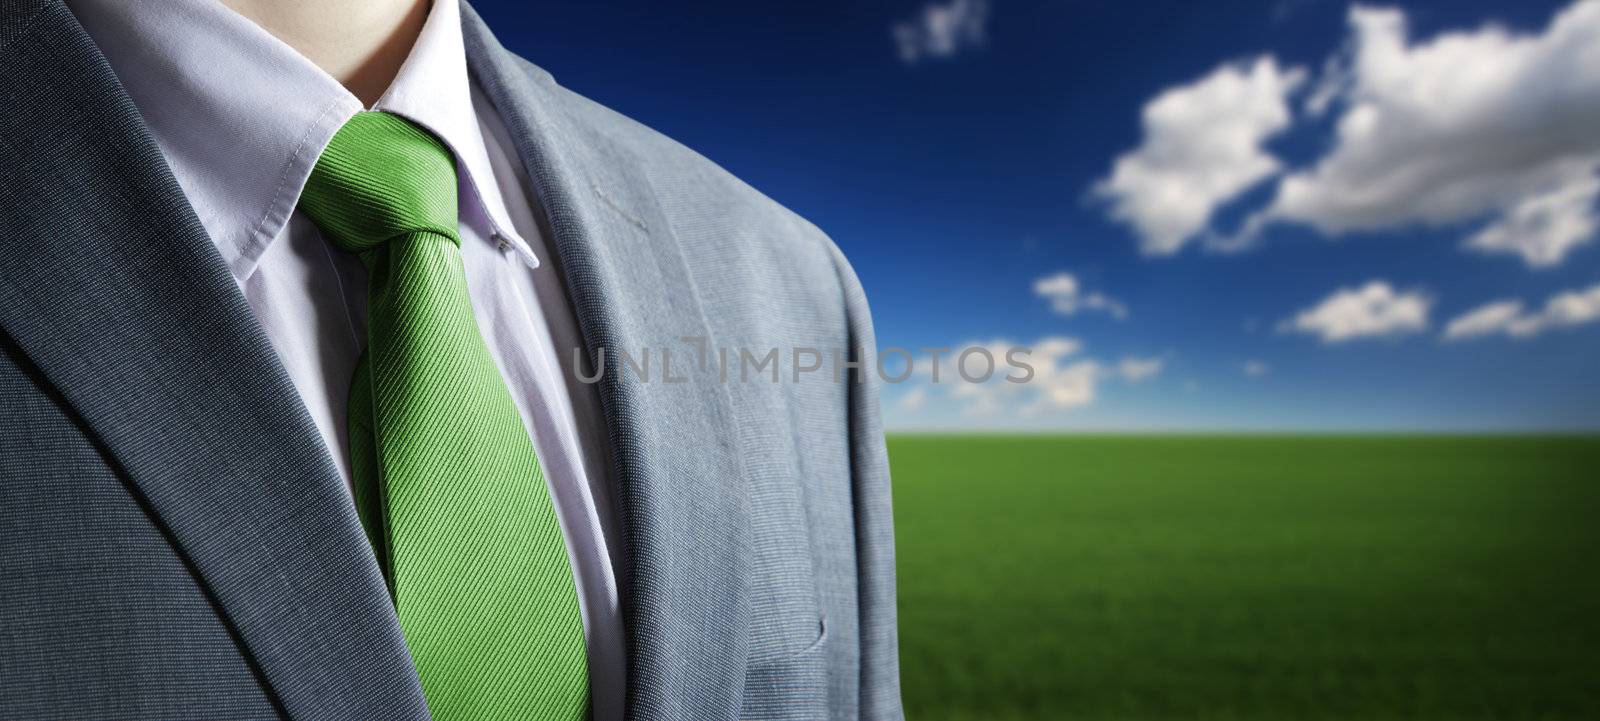 environment concept: Close up of classic business attire with gr by stokkete